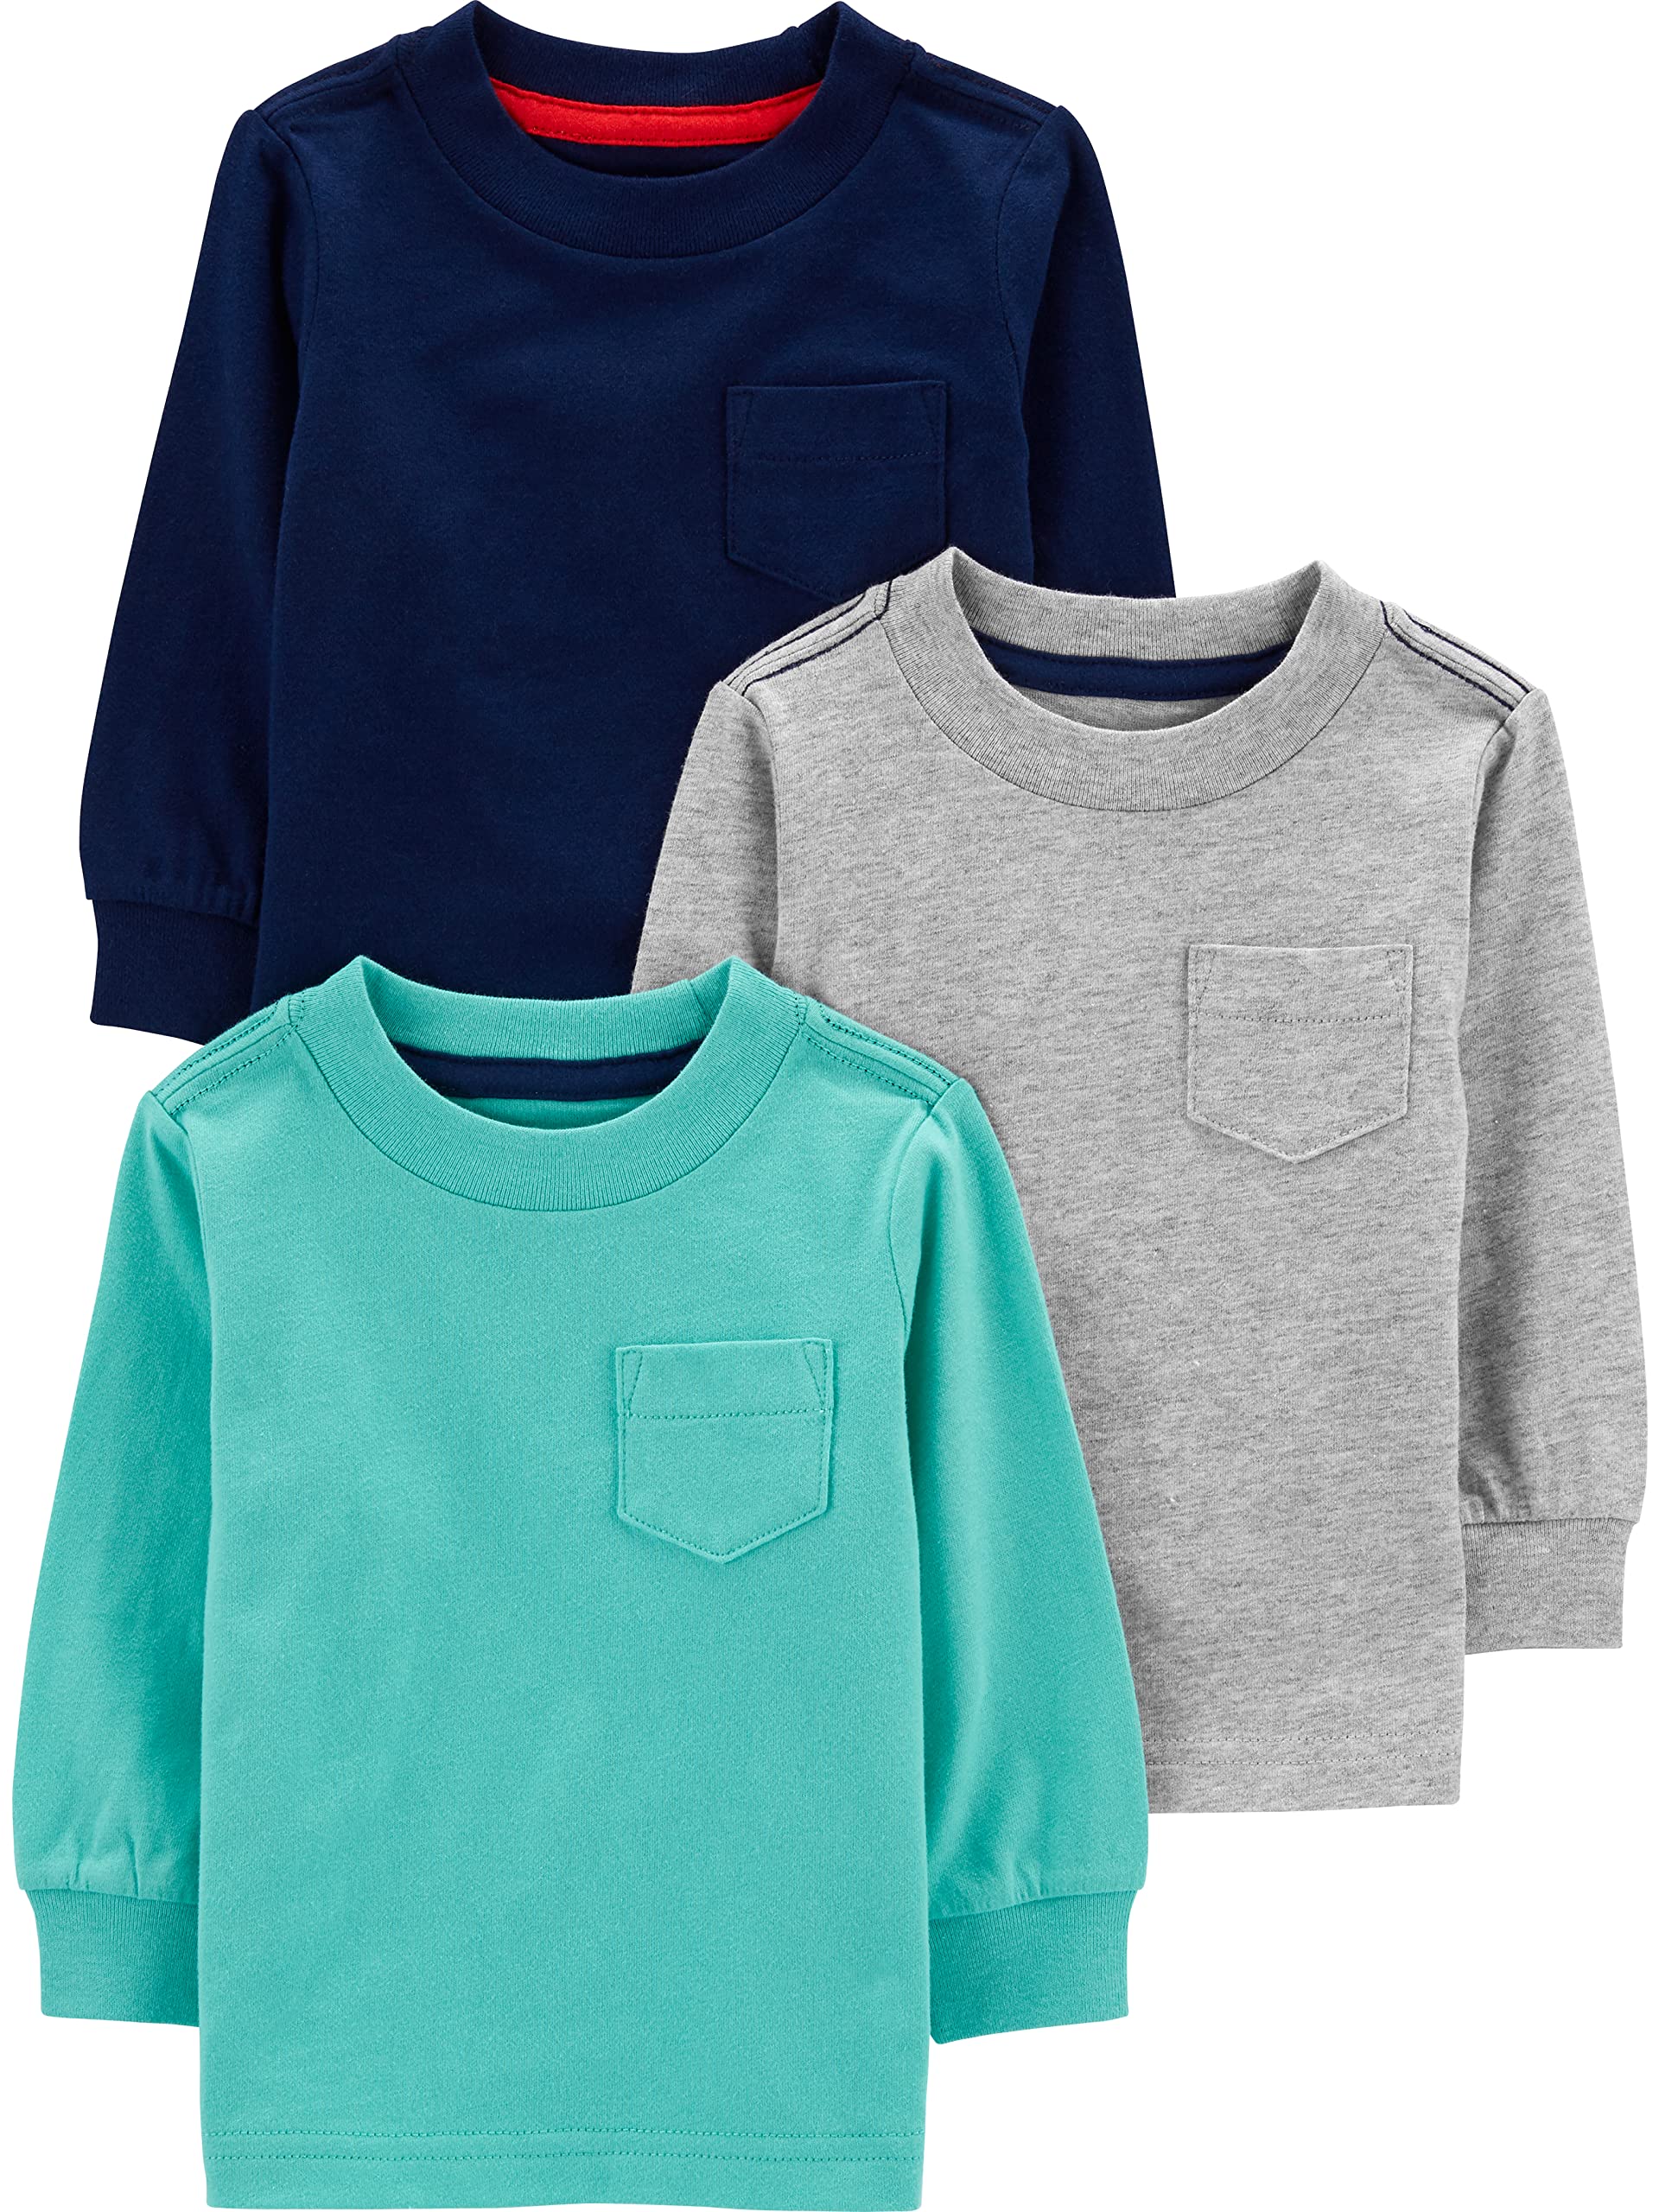 Simple Joys by Carter's Boys' Long-Sleeve Shirts, Pack of 3